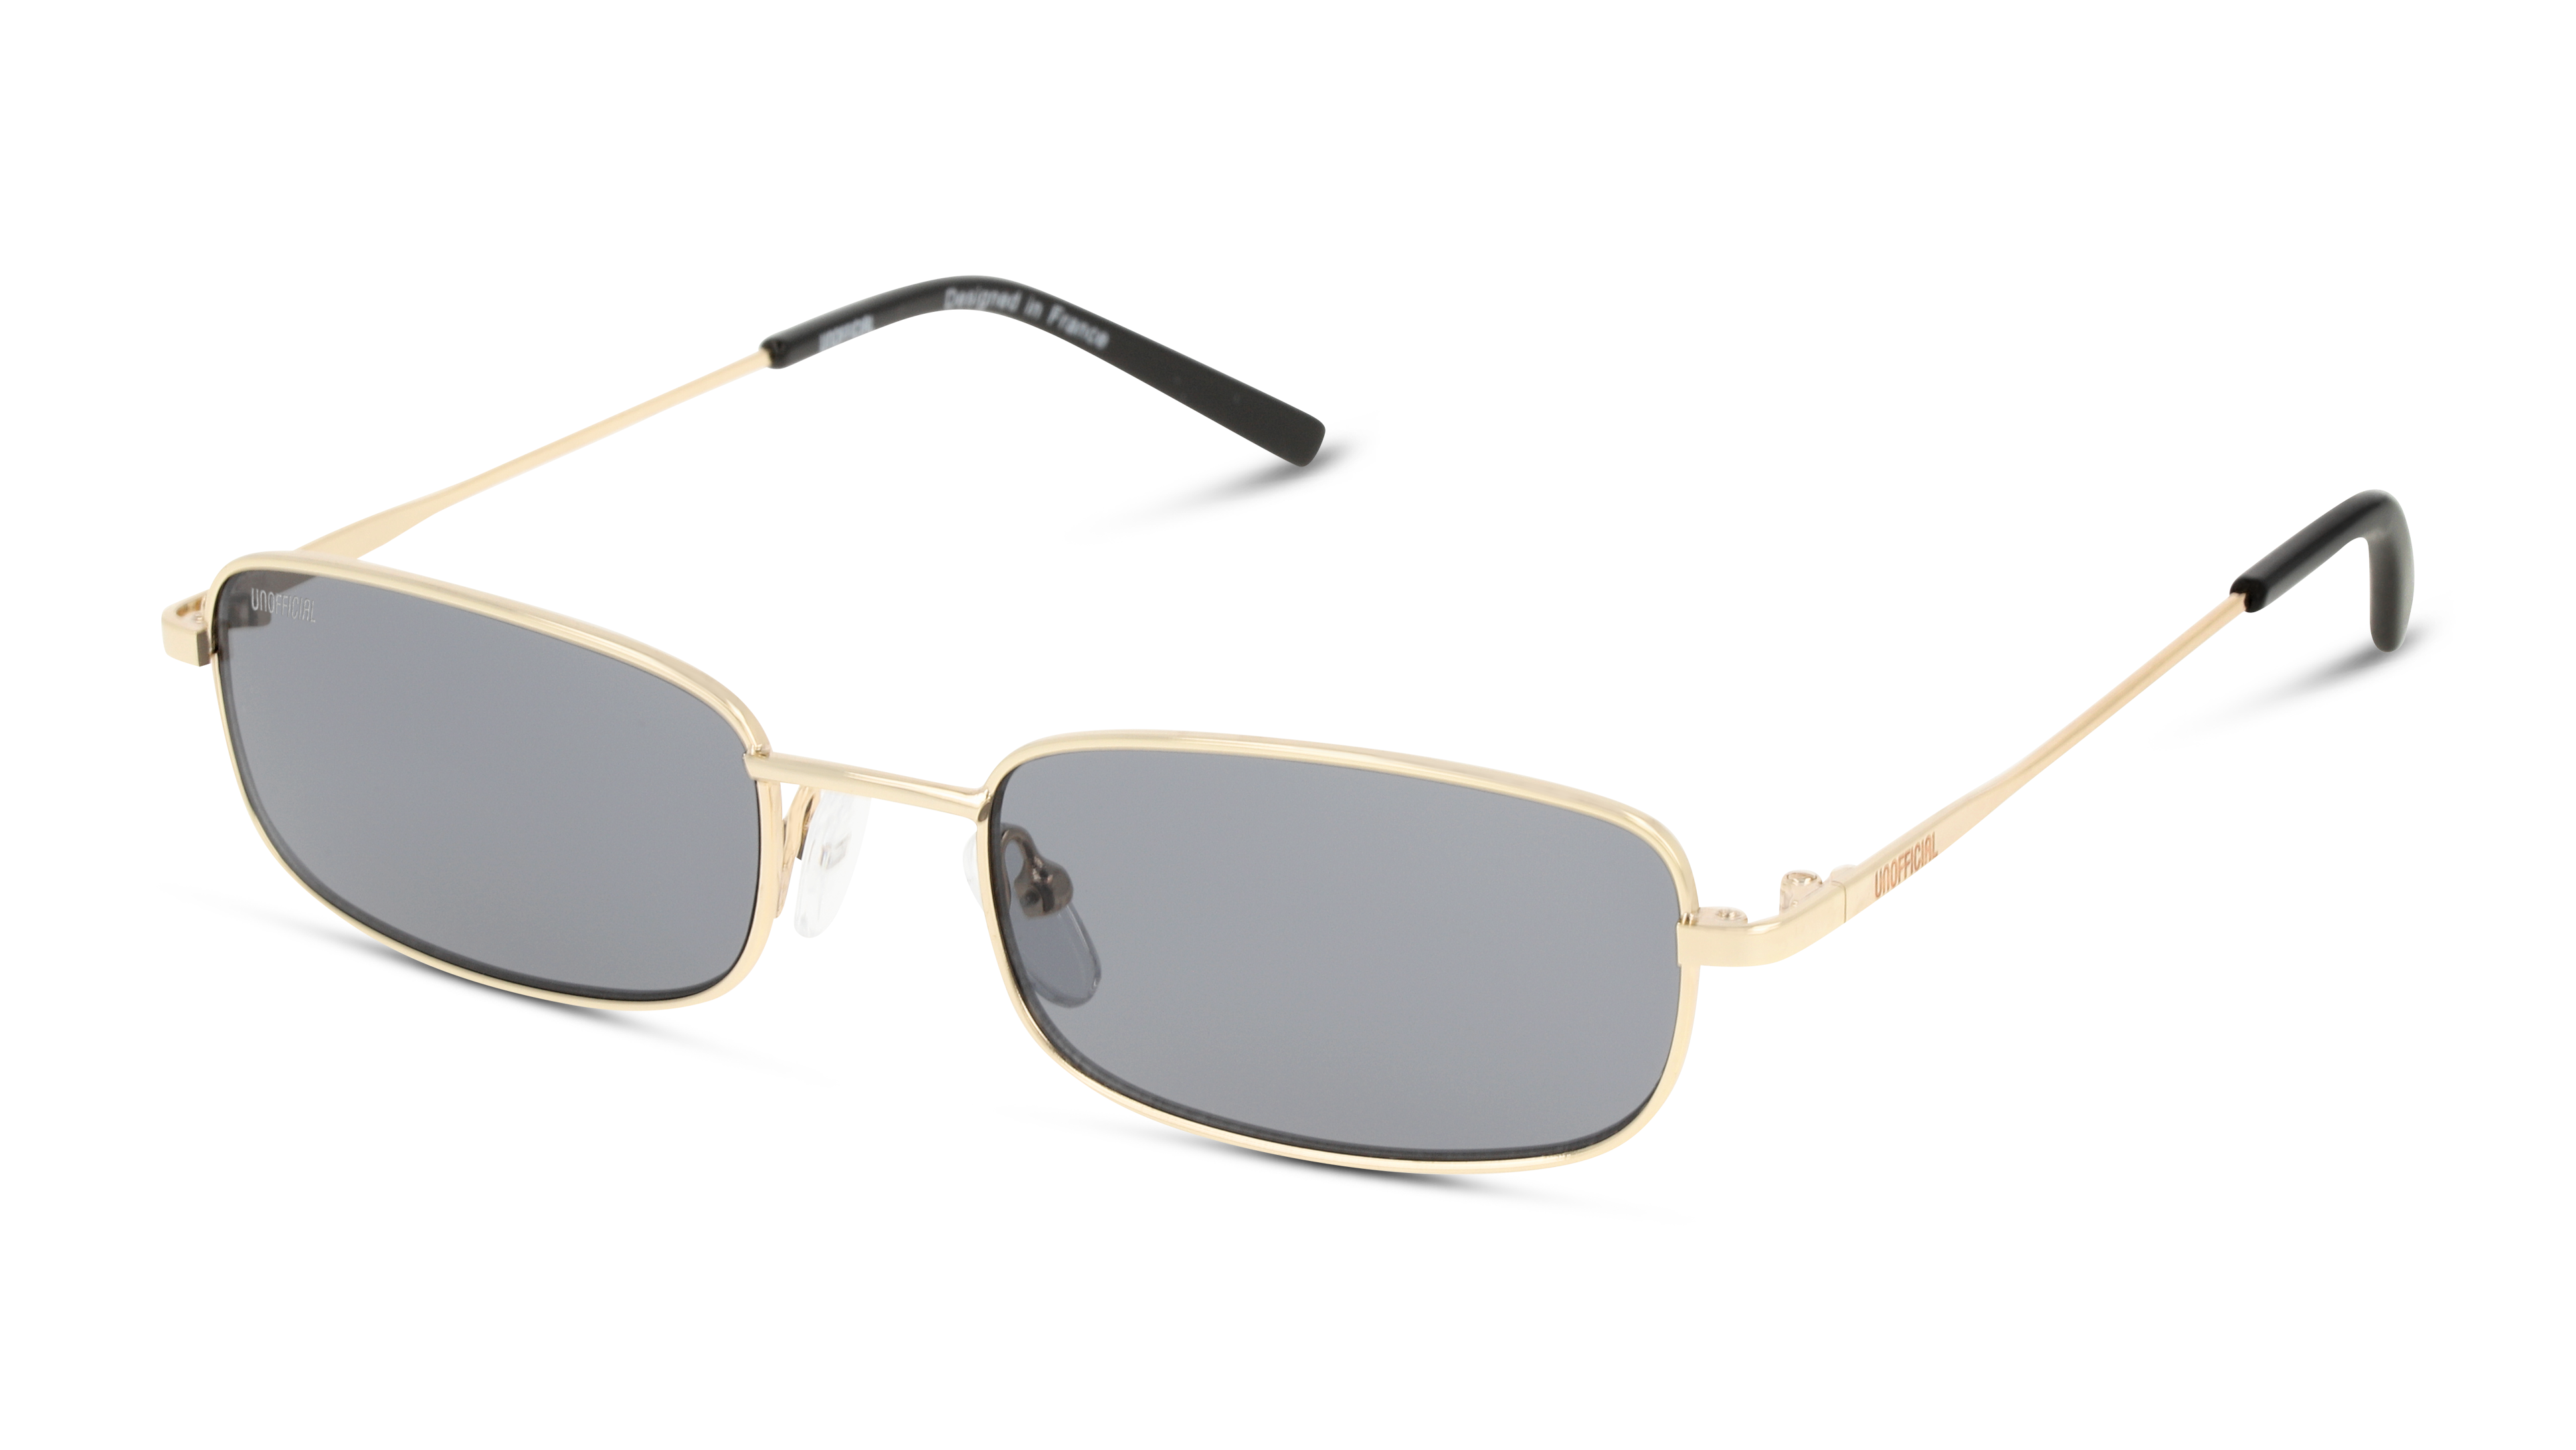 Angle_Left01 Unofficial UNSU0087 Sunglasses Grey / Gold